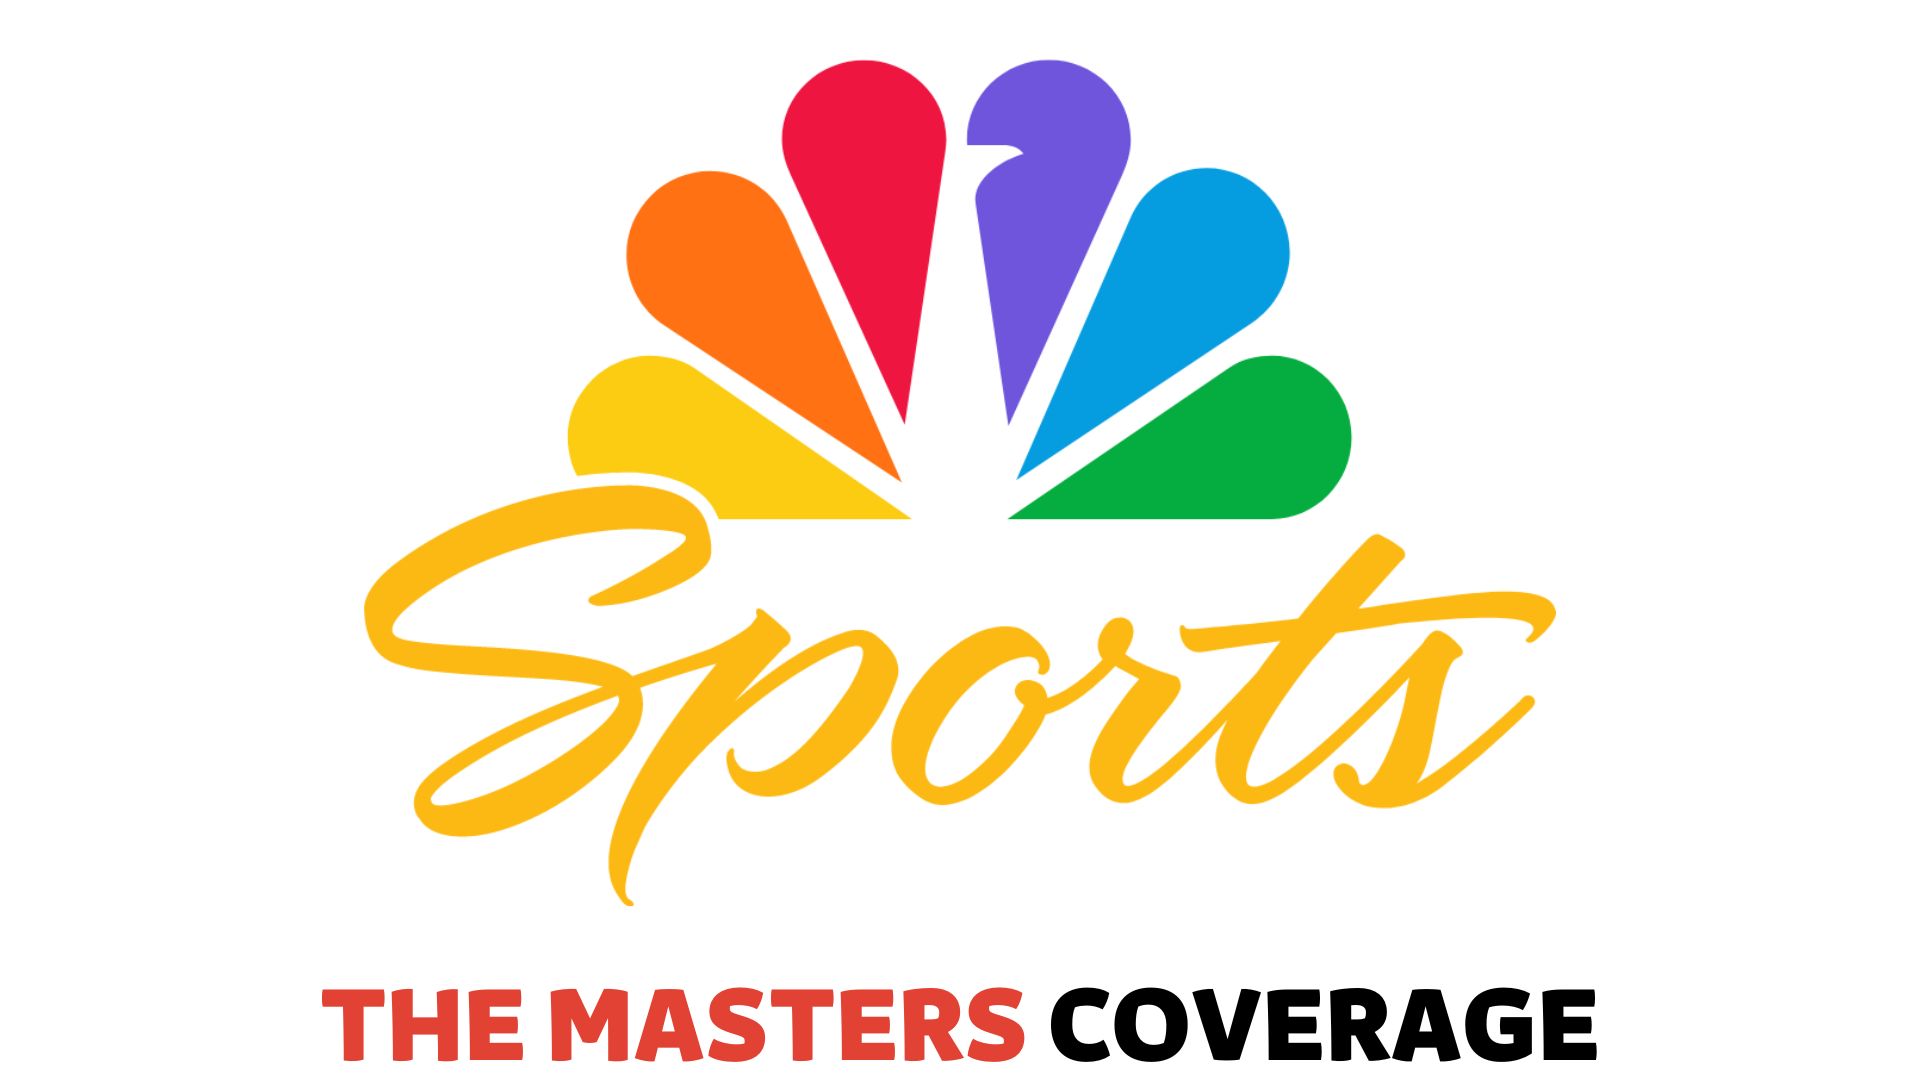 Watch The Masters Golf on NBC Sports